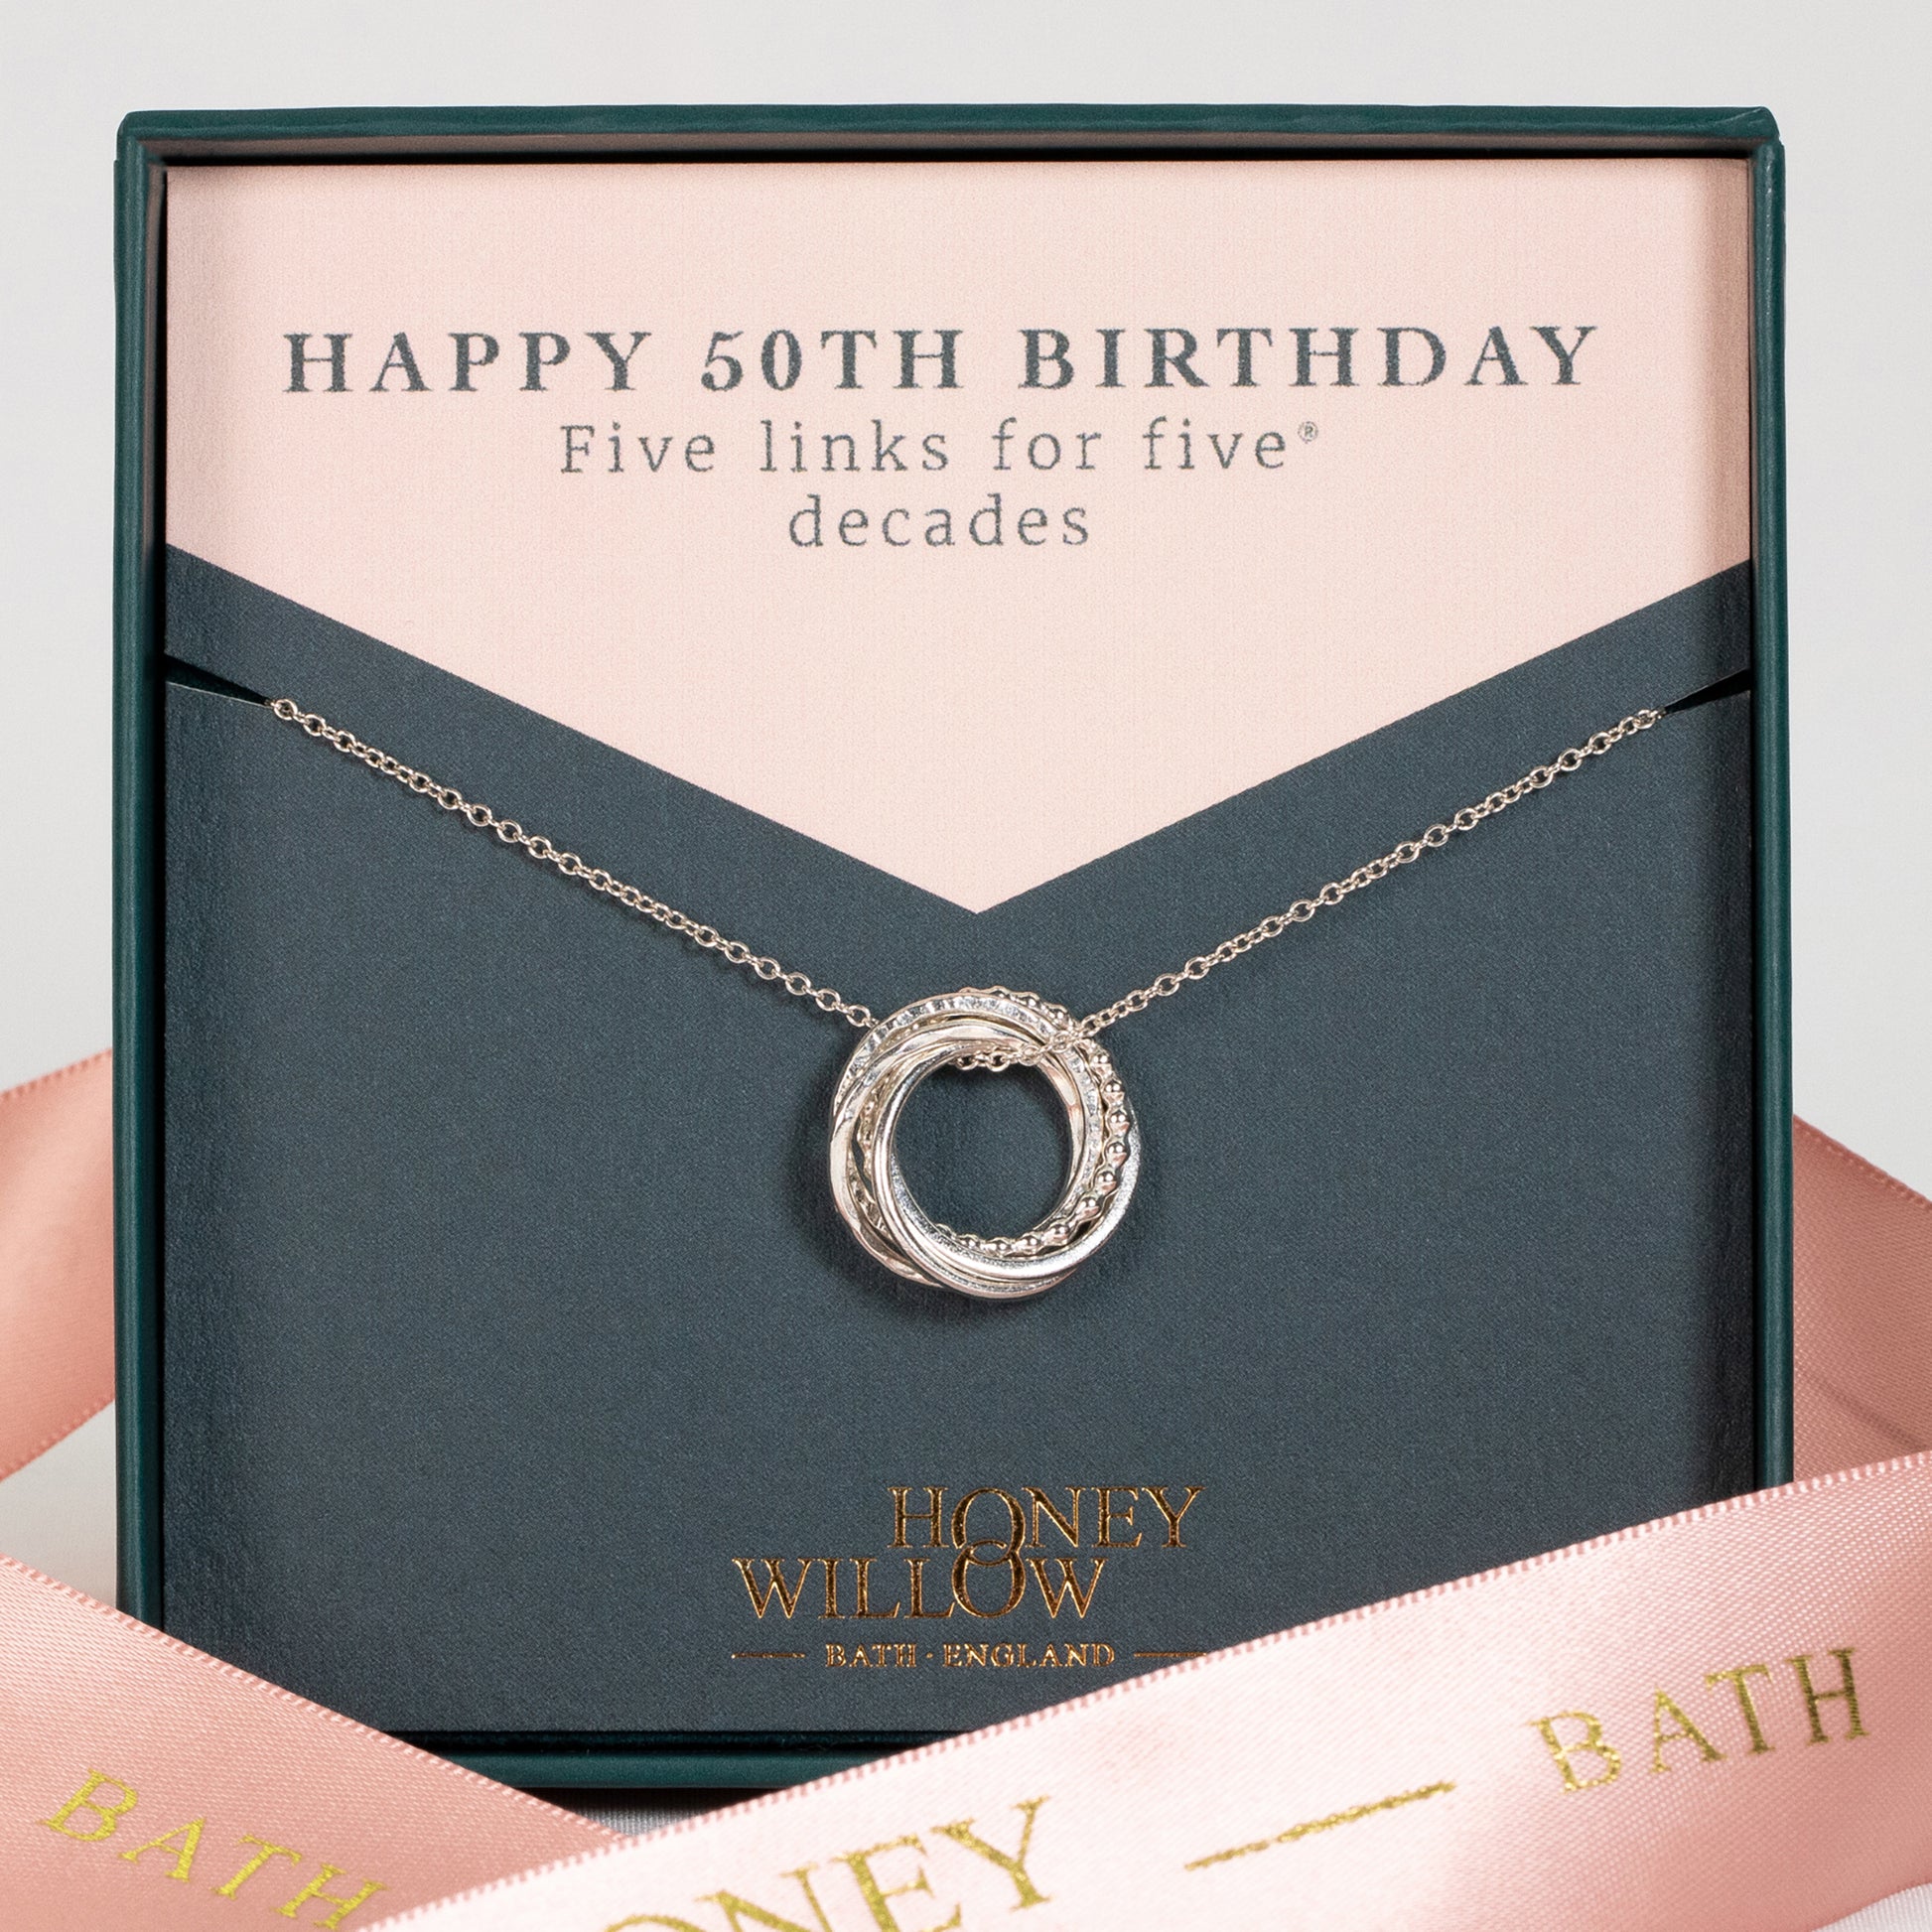 50th Birthday Necklace - The Original 5 Links for 5 Decades Necklace - Petite Silver